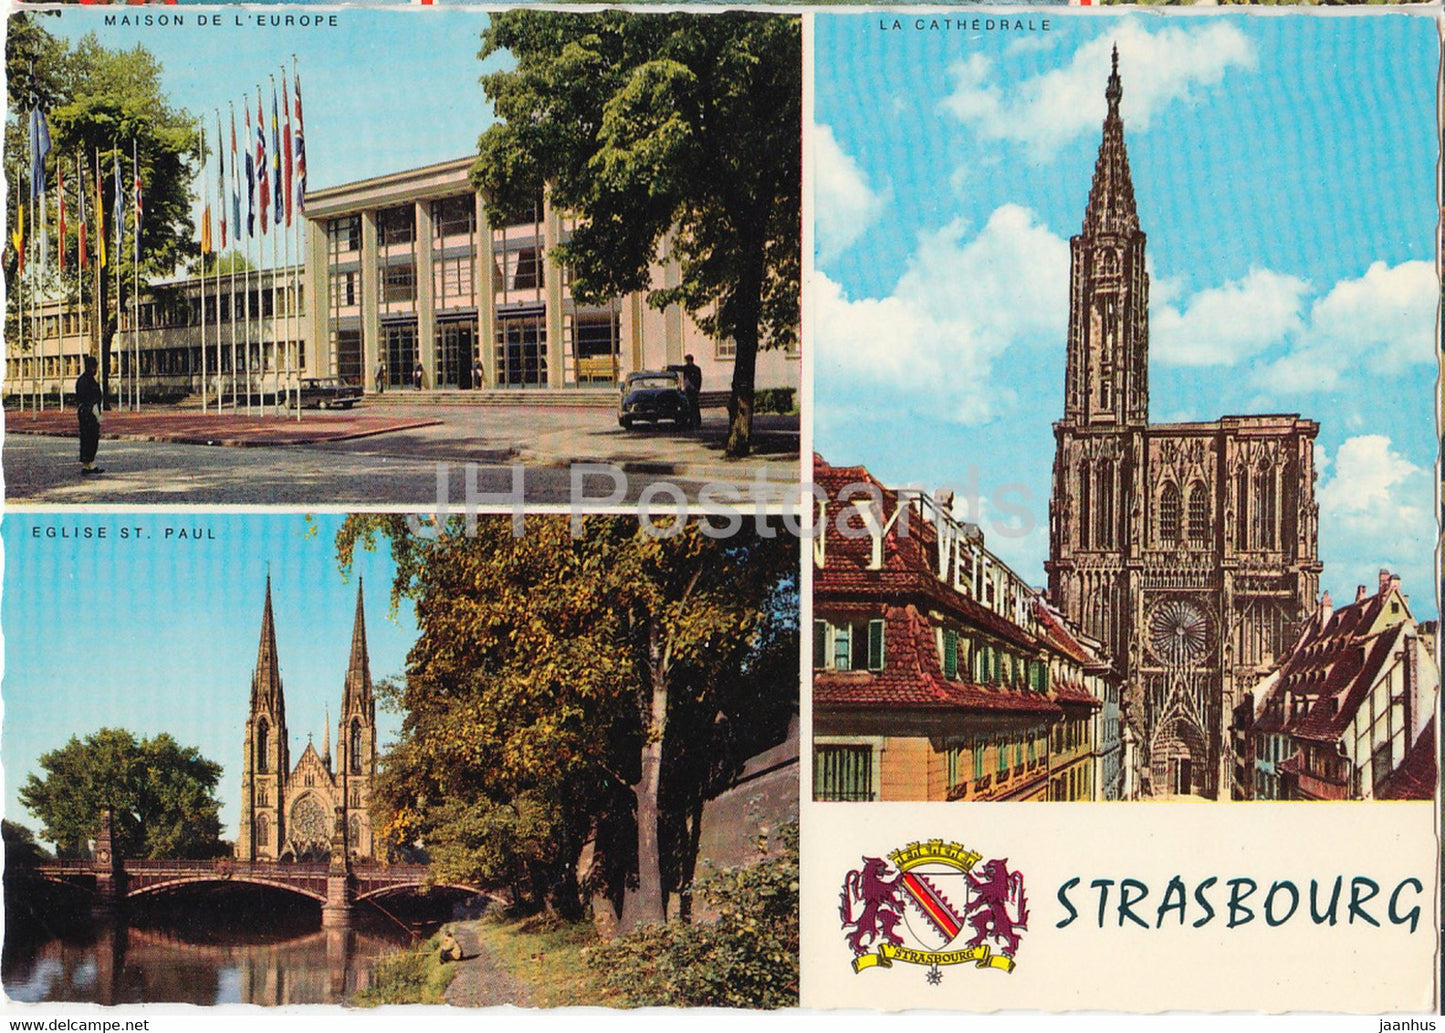 Strasbourg - Maison de L'Europe - La Cathedrale - Eglise St Paul - cathedral - multiview - France - used - JH Postcards